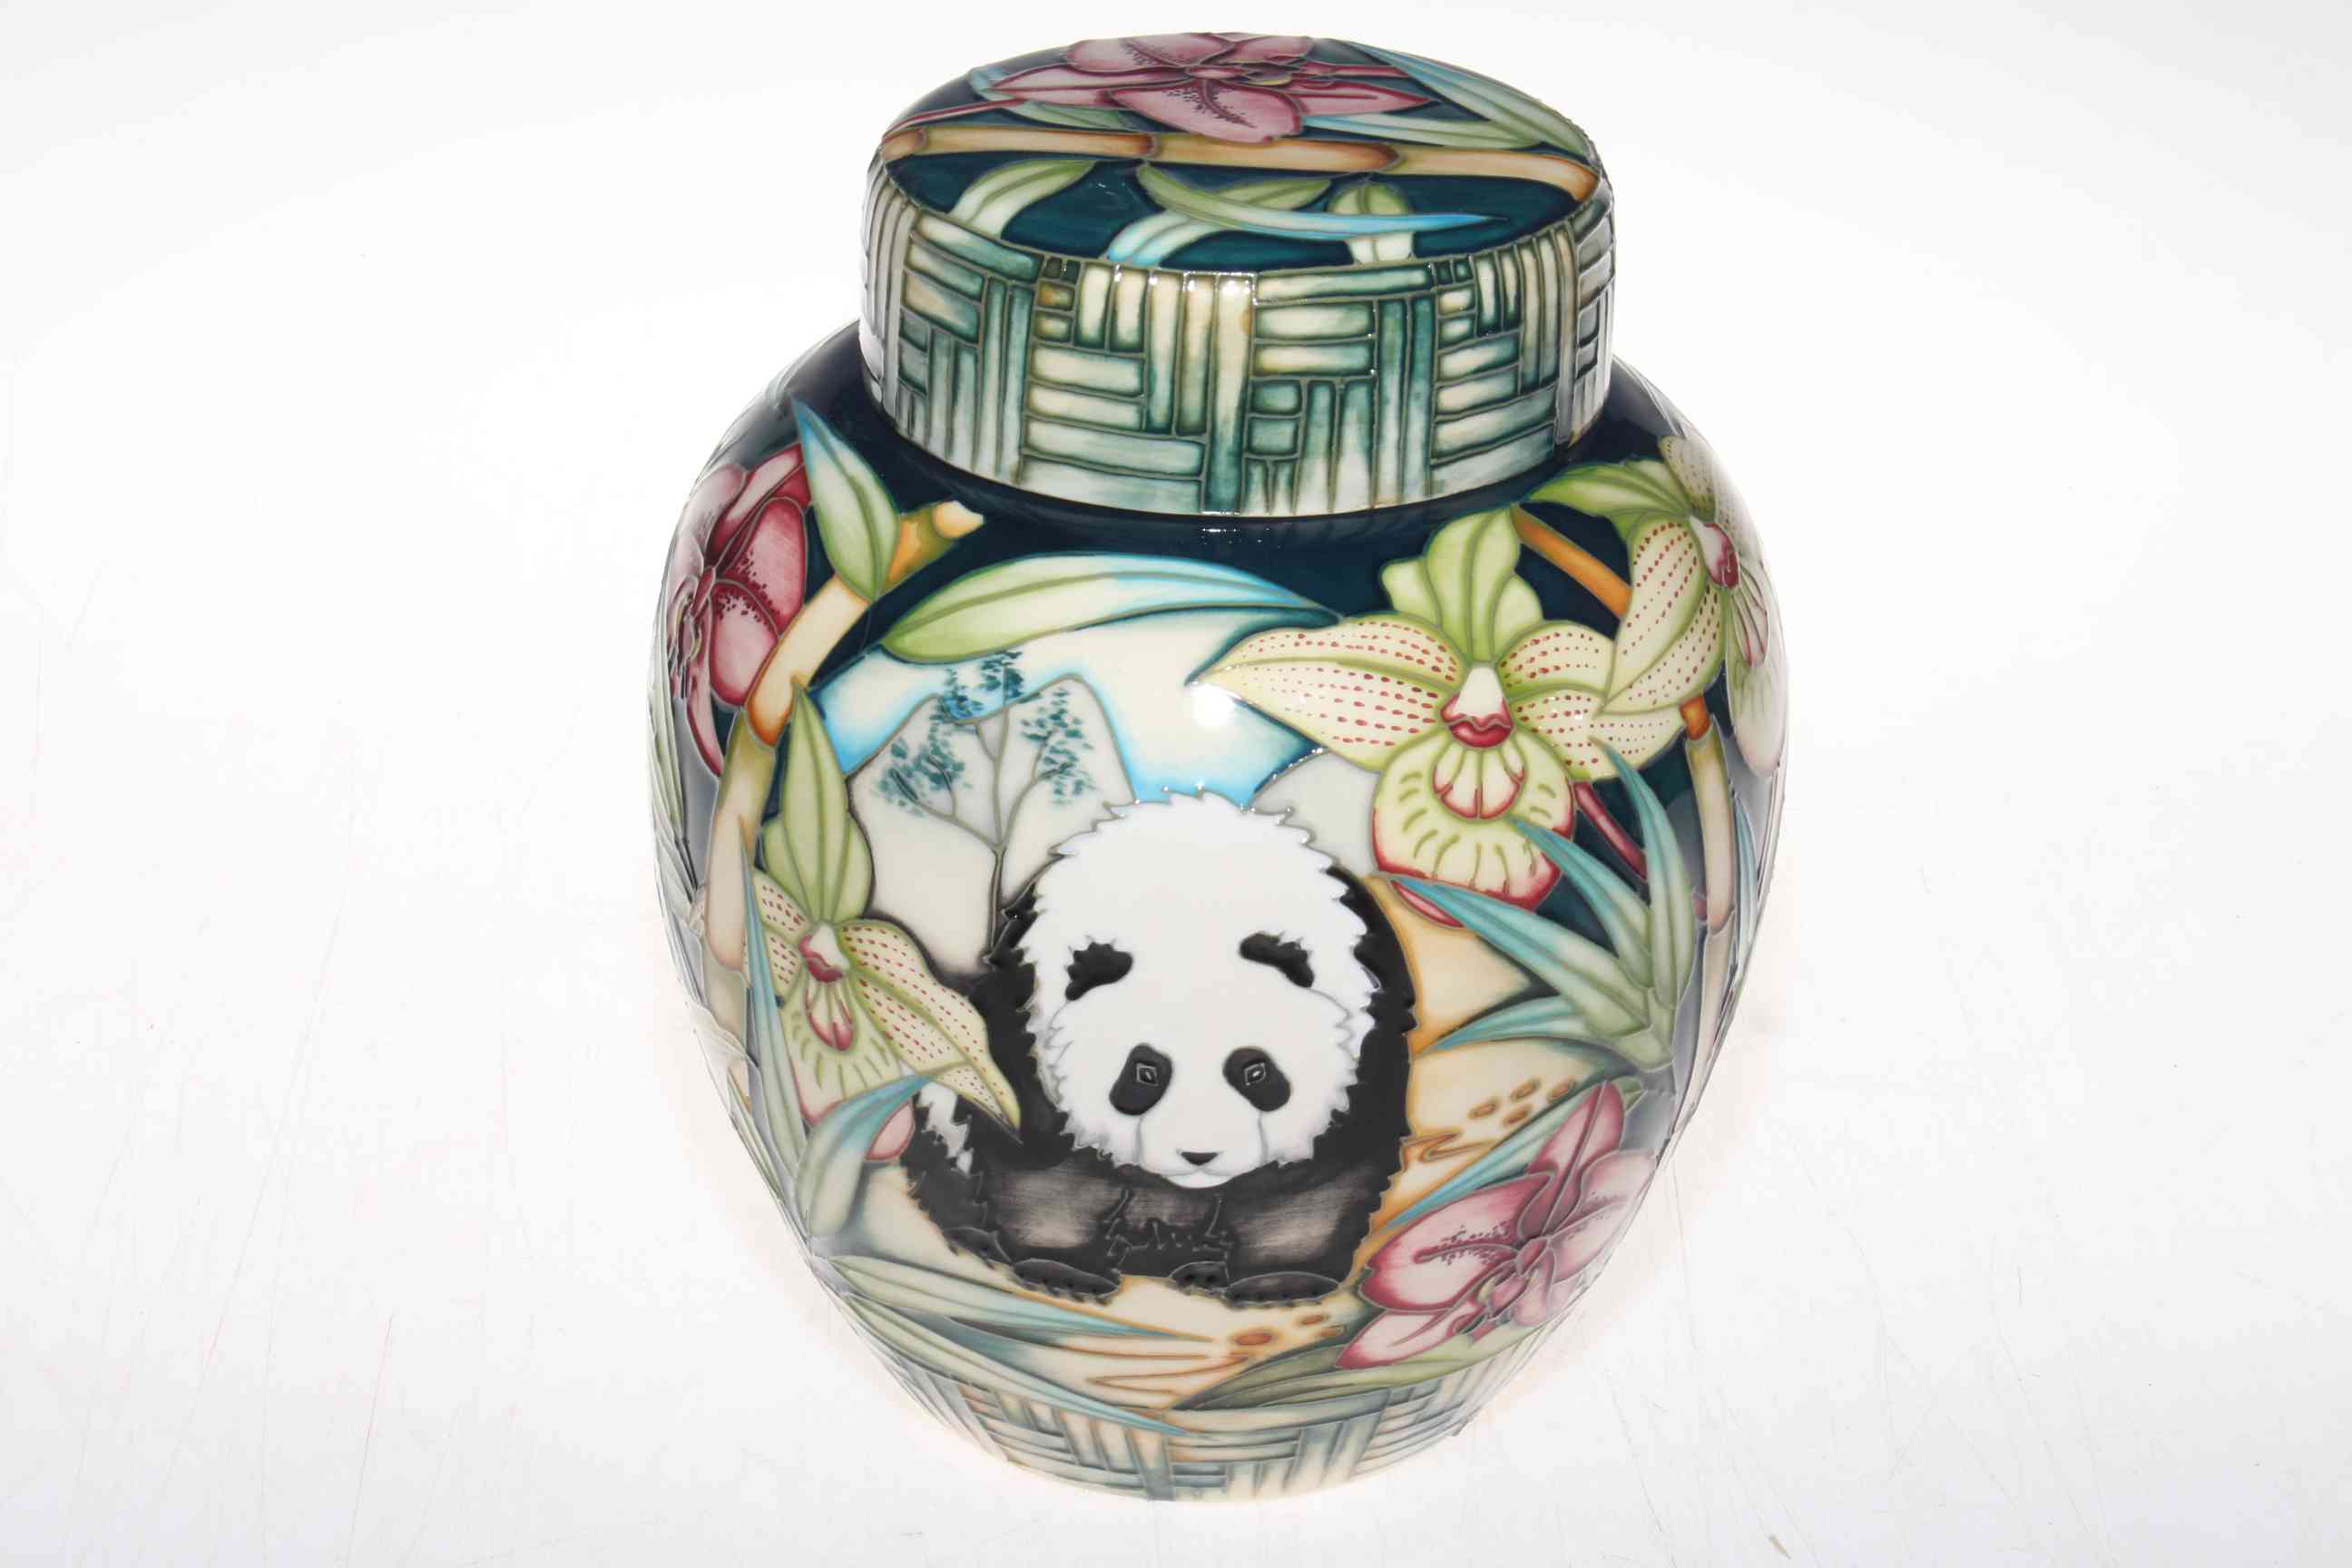 Moorcroft limited edition Pandas ginger jar by Sian Leeper, 132/150, 20cm, with box.